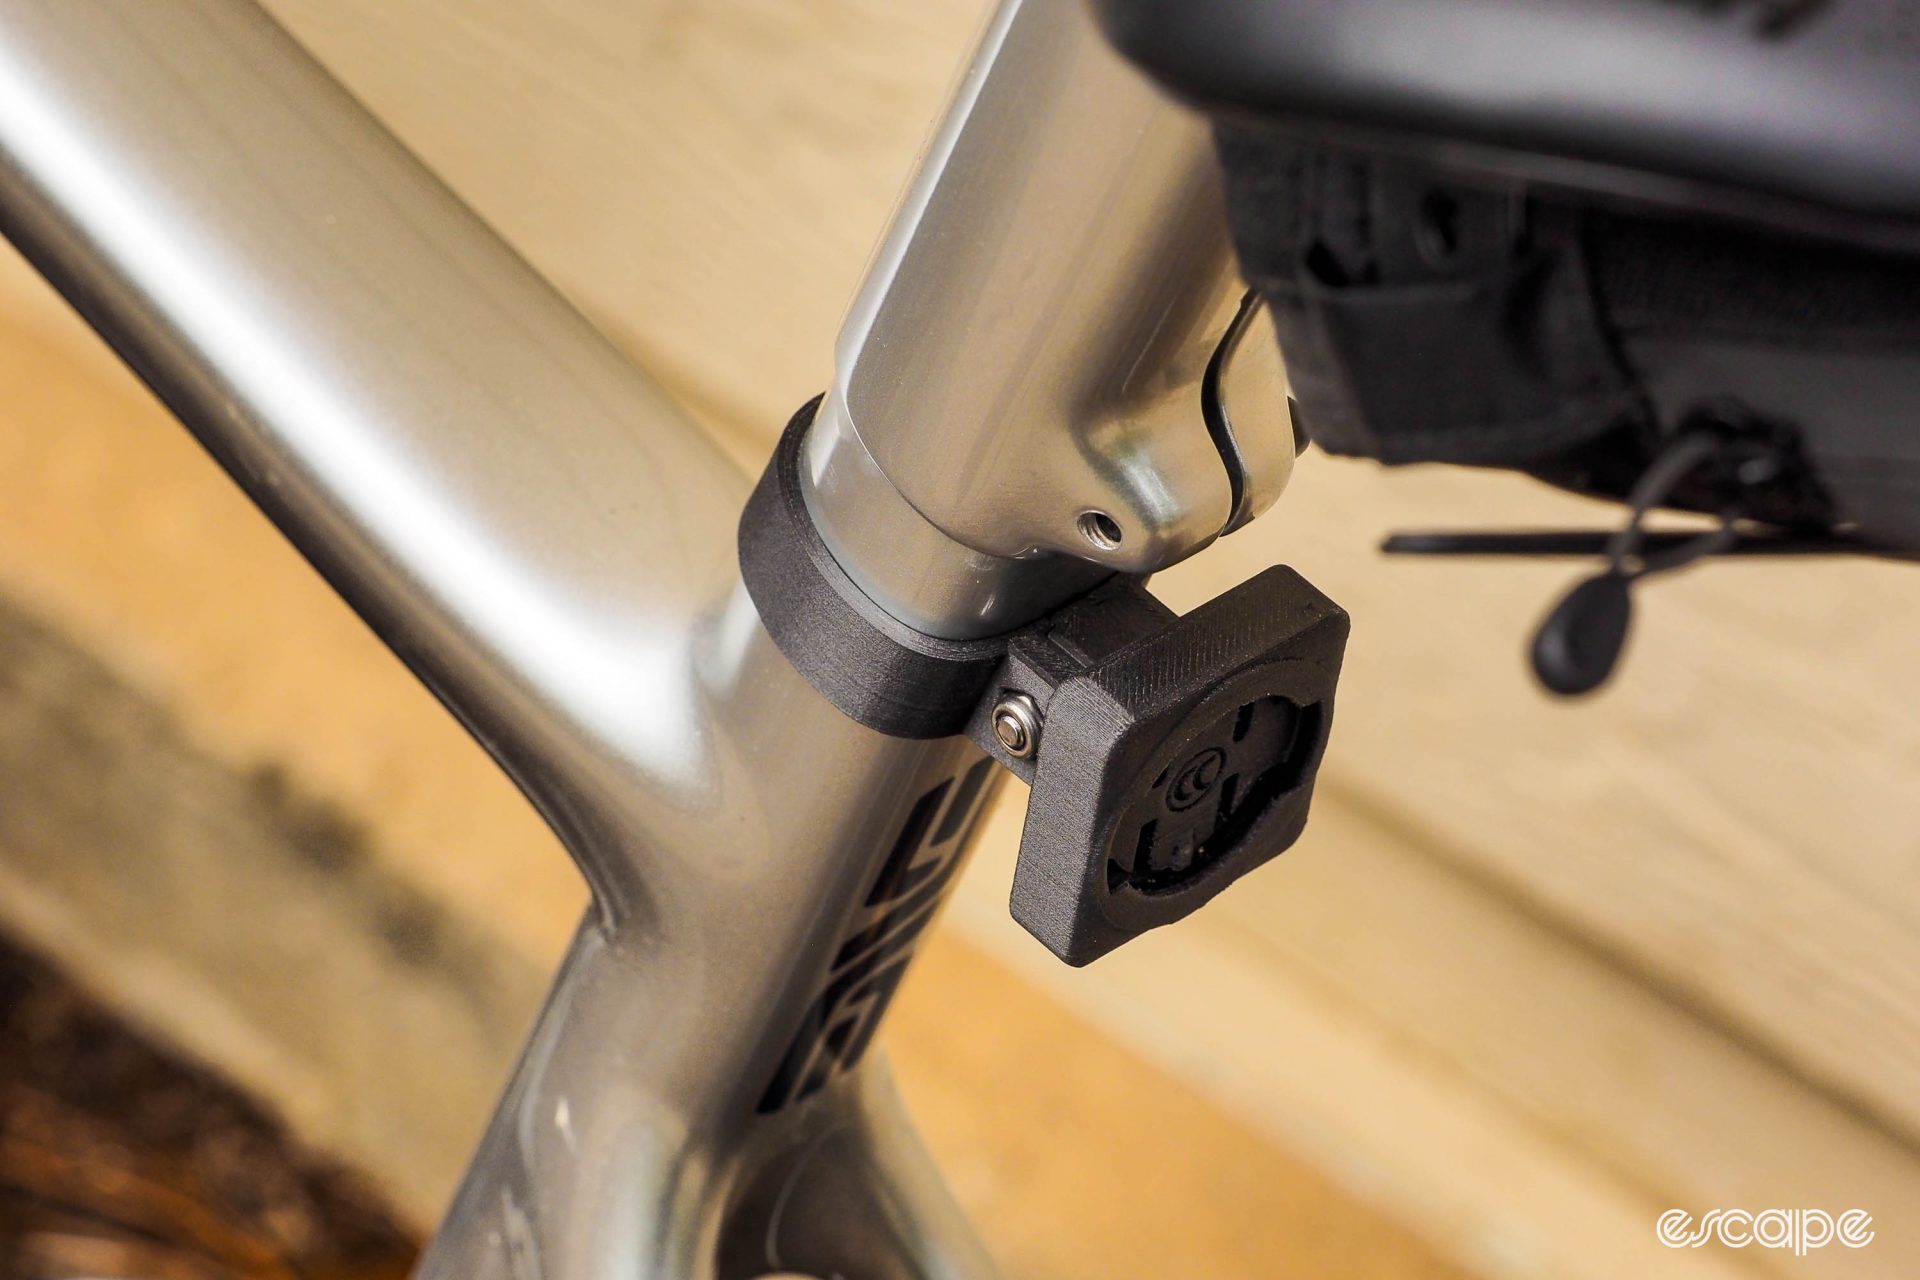 Concentric Cycling seatpost mount for Garmin Varia radar unit mounted on Enve Custom Allroad